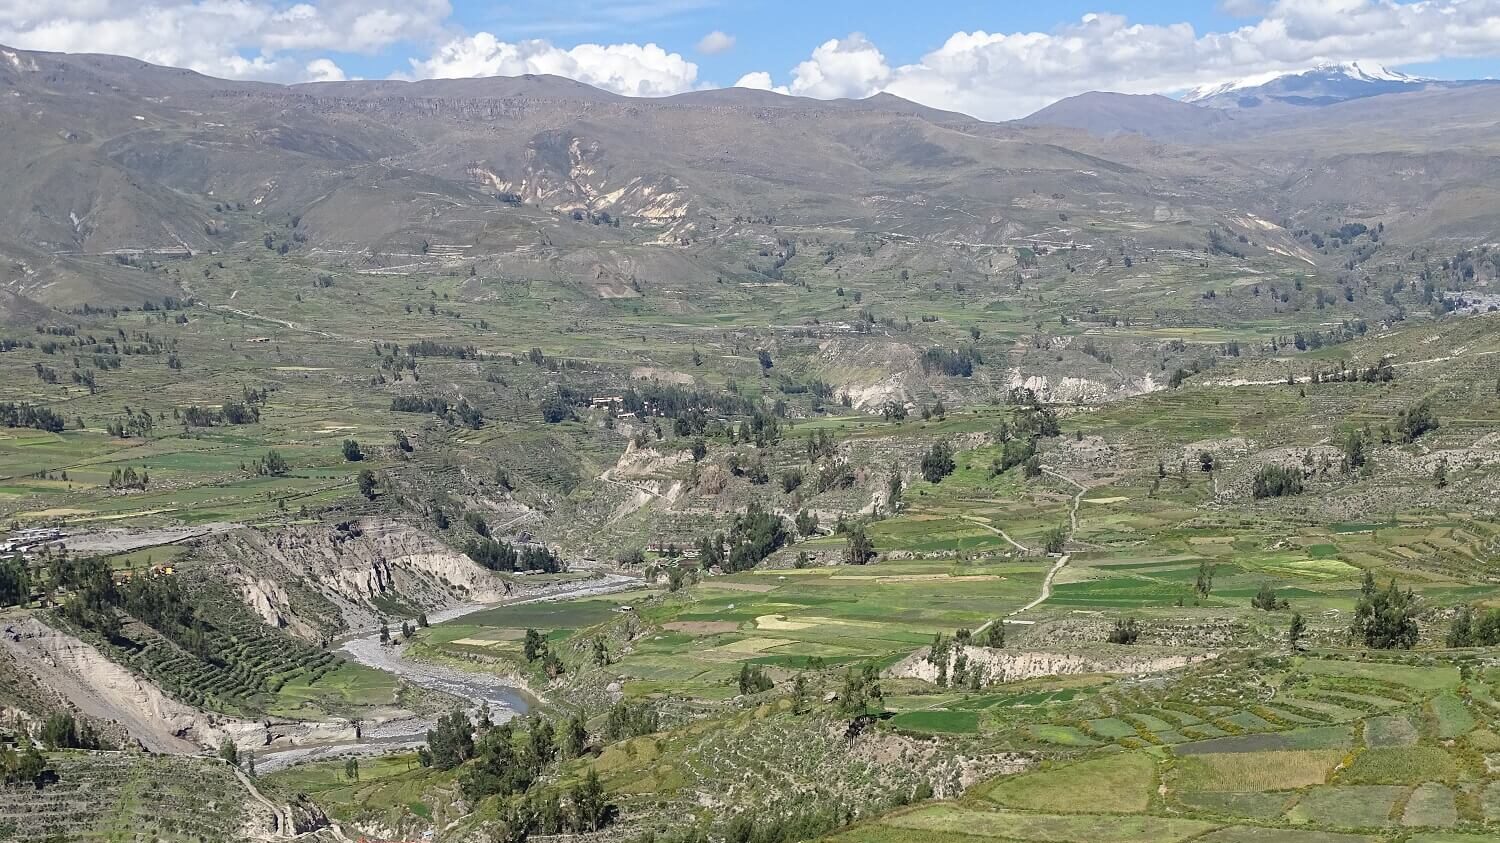 Landscape of the Colca Canyon, Peru, from a viewpoint close to Coporaque, Peru. Visit the Colca Canyon RESPONSibly with RESPONSible Travel Peru